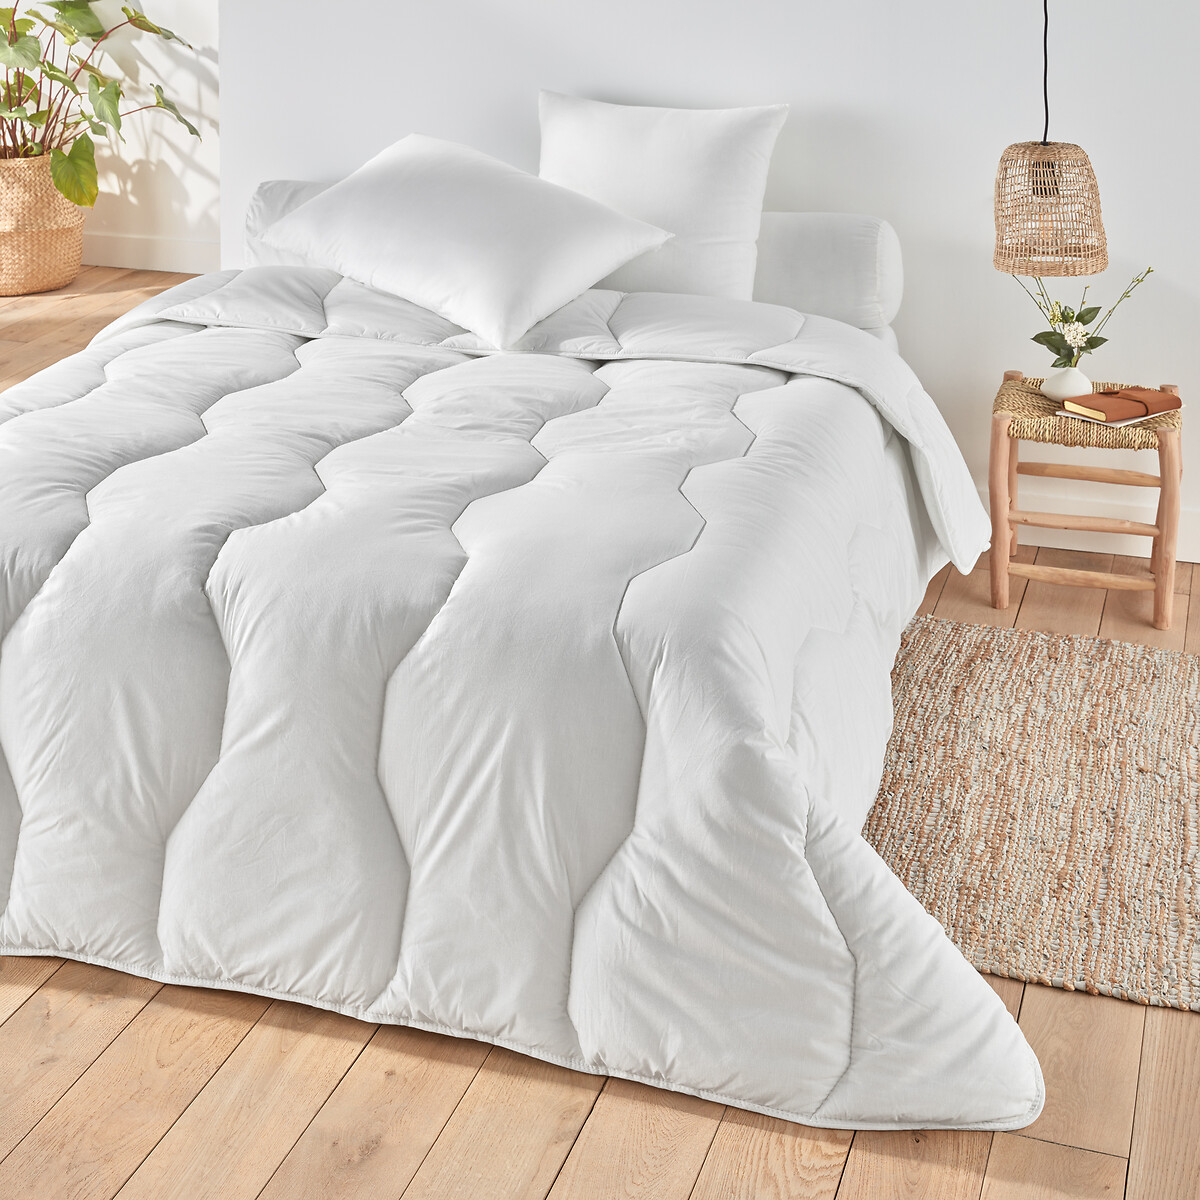 Winter Synthetic Duvet, Organic Cotton Cover with Anti-Mite Treatment